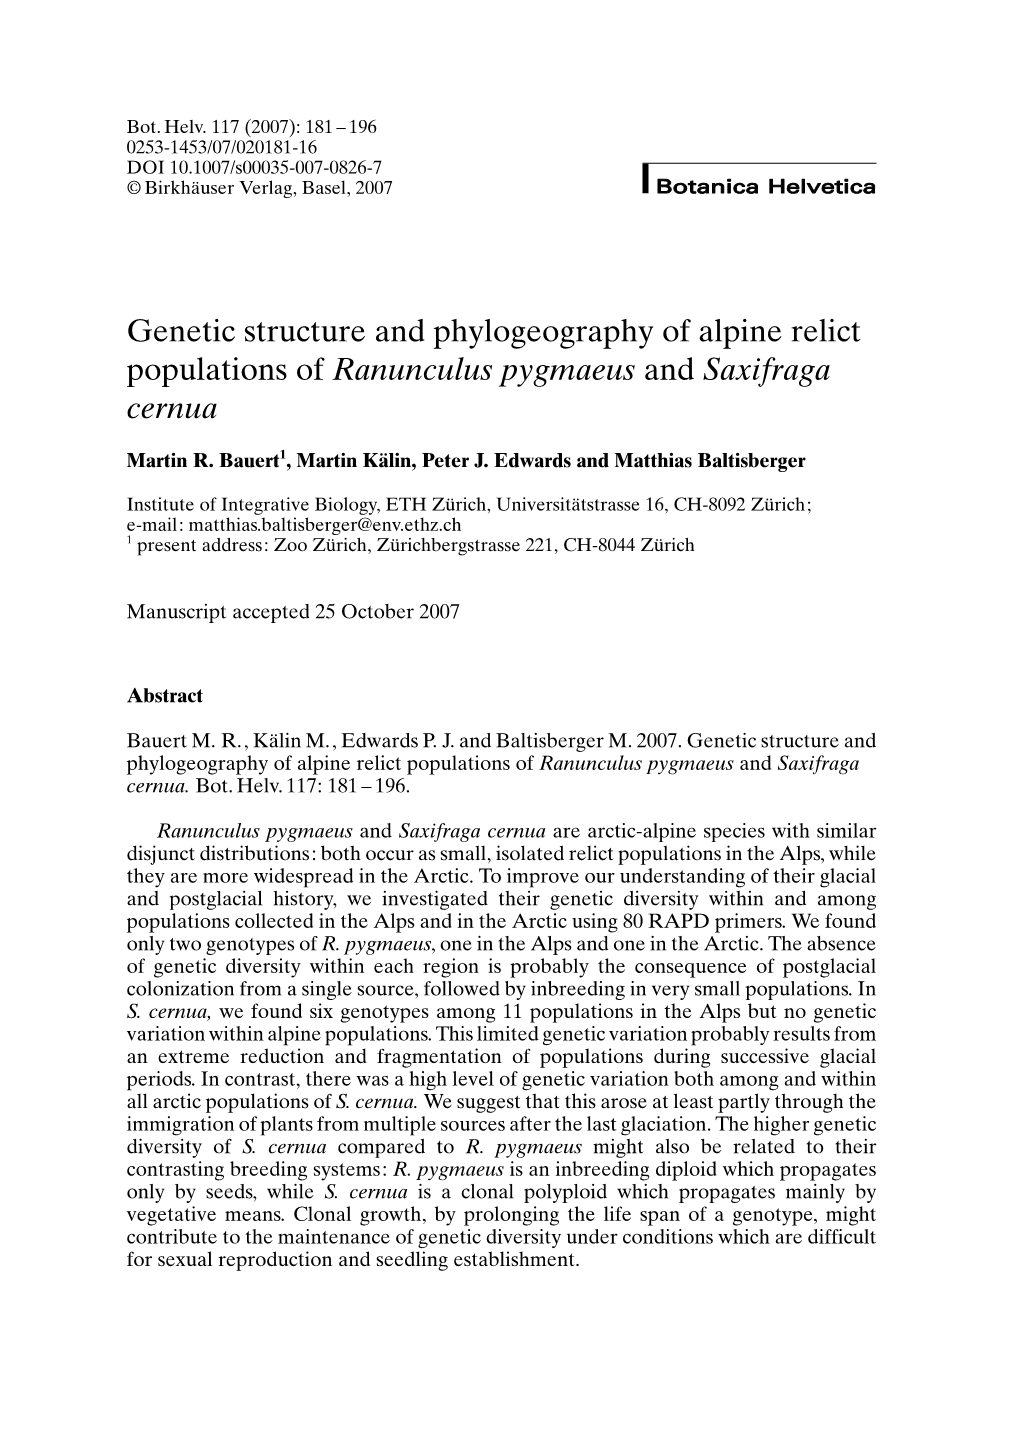 Genetic Structure and Phylogeography of Alpine Relict Populations of Ranunculus Pygmaeus and Saxifraga Cernua